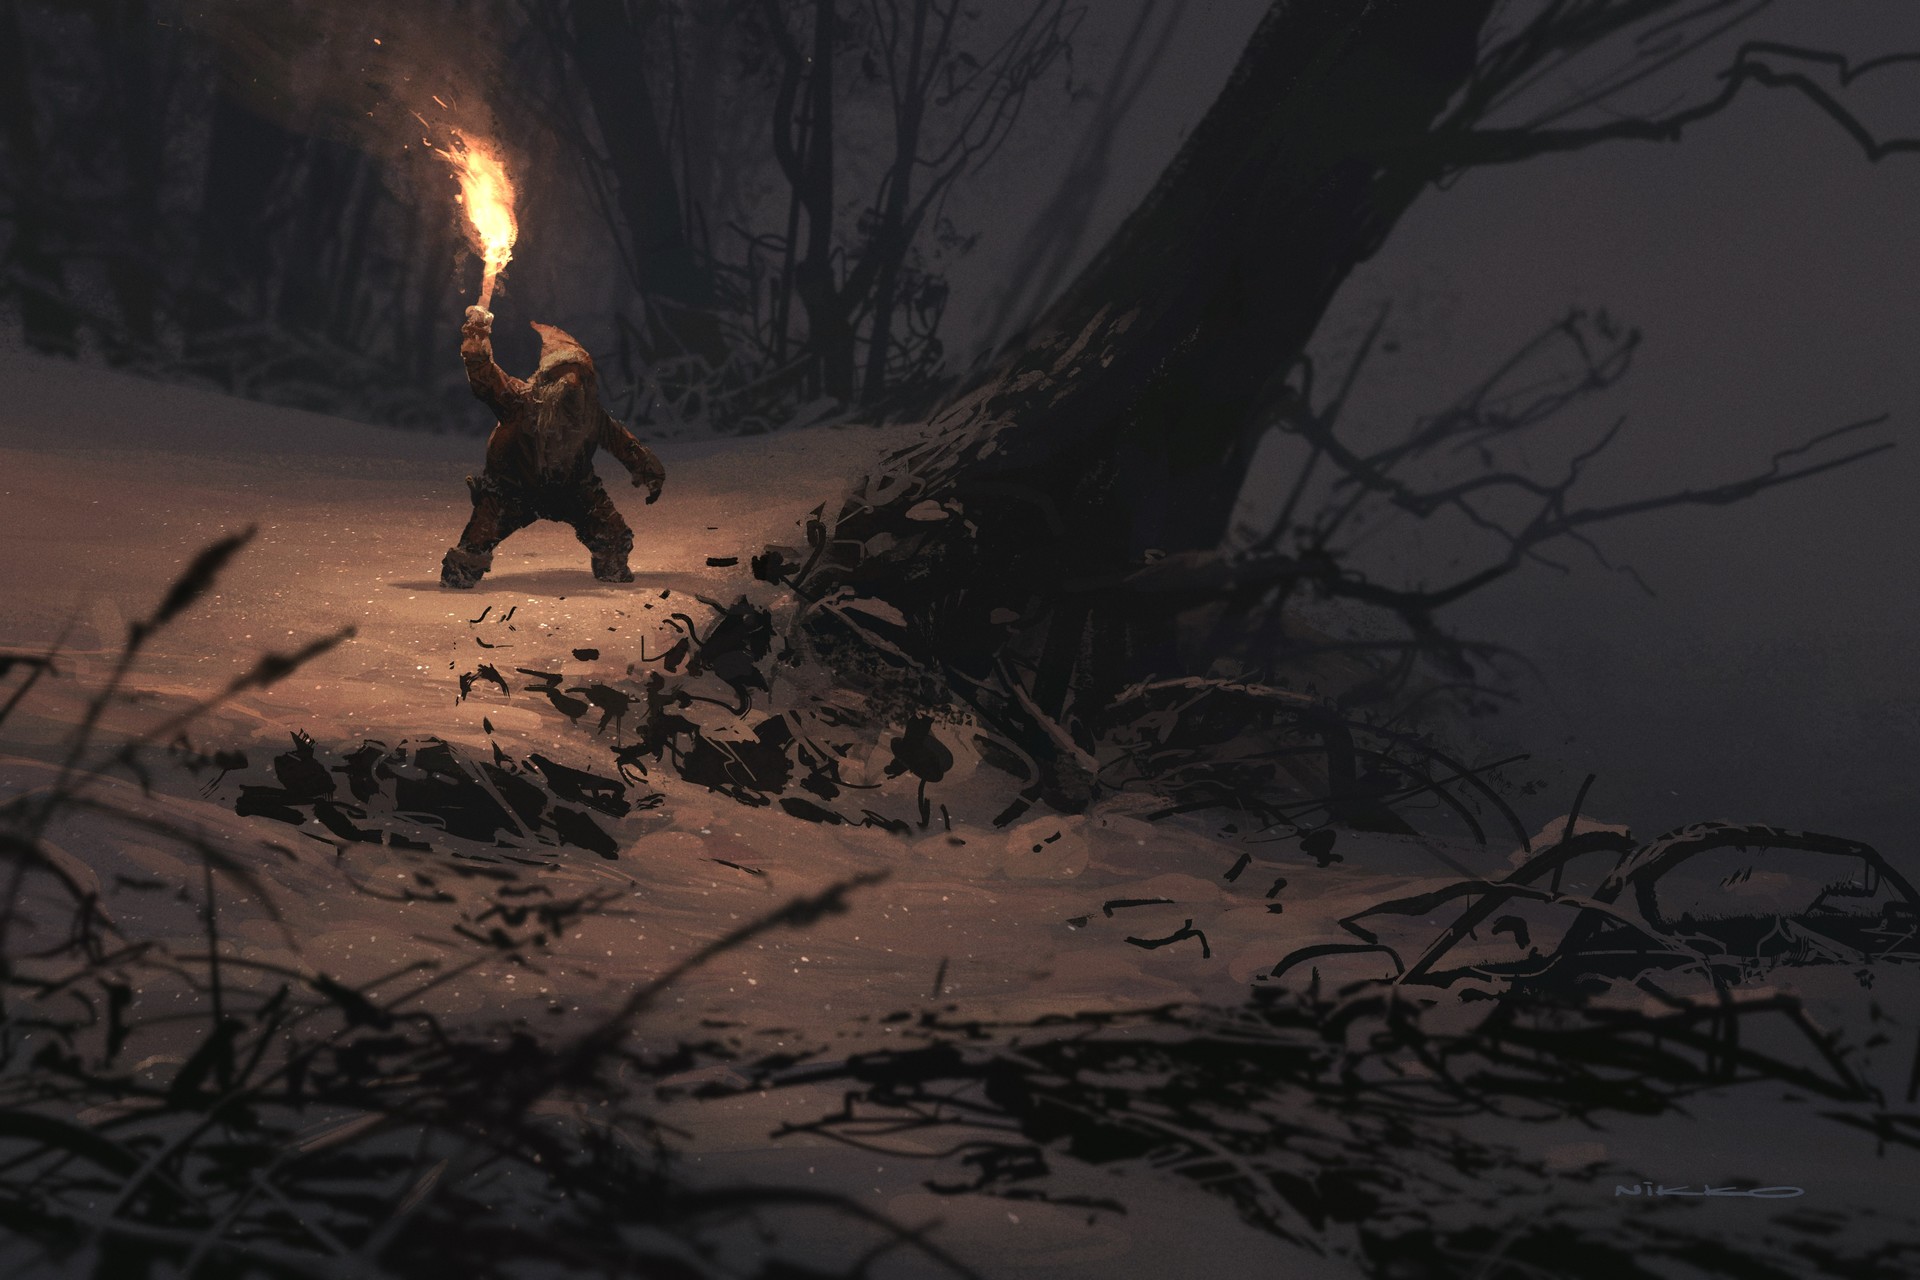 General 1920x1280 torches winter snow snow covered trees nature outdoors dark night 2D artwork beard